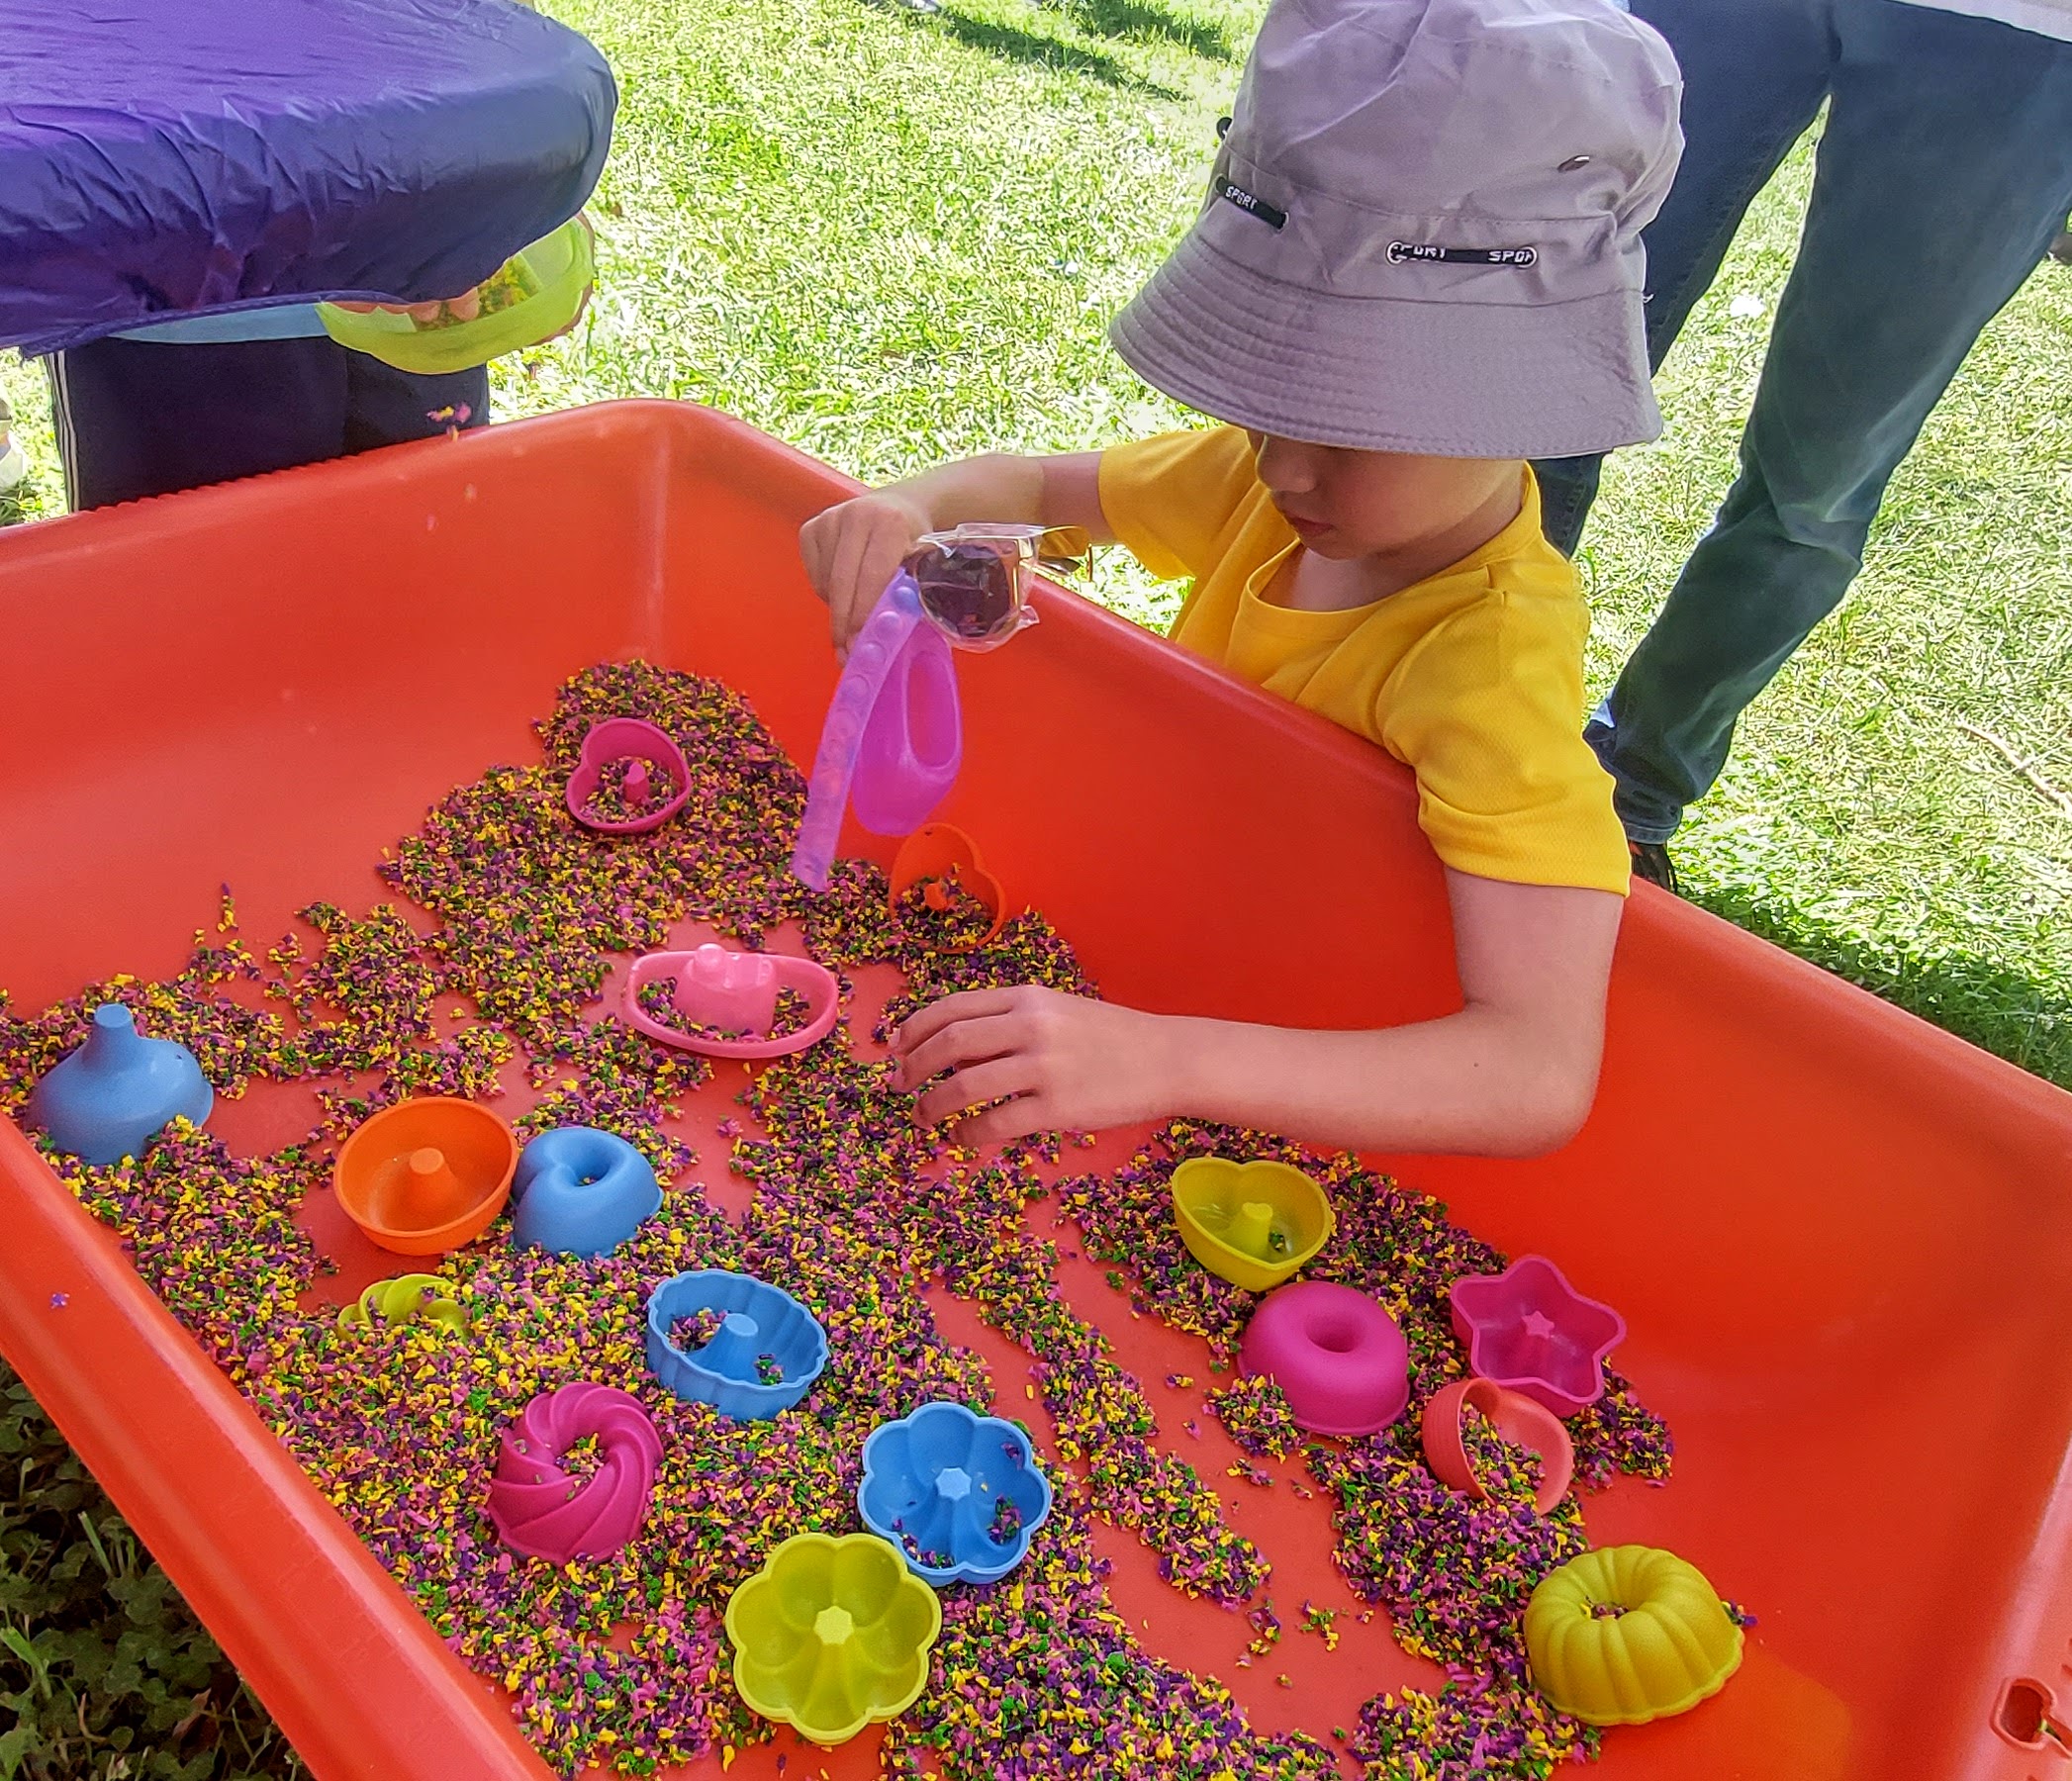 A little boy plays in a sensory bin filled with rainbow fluff and molding toys